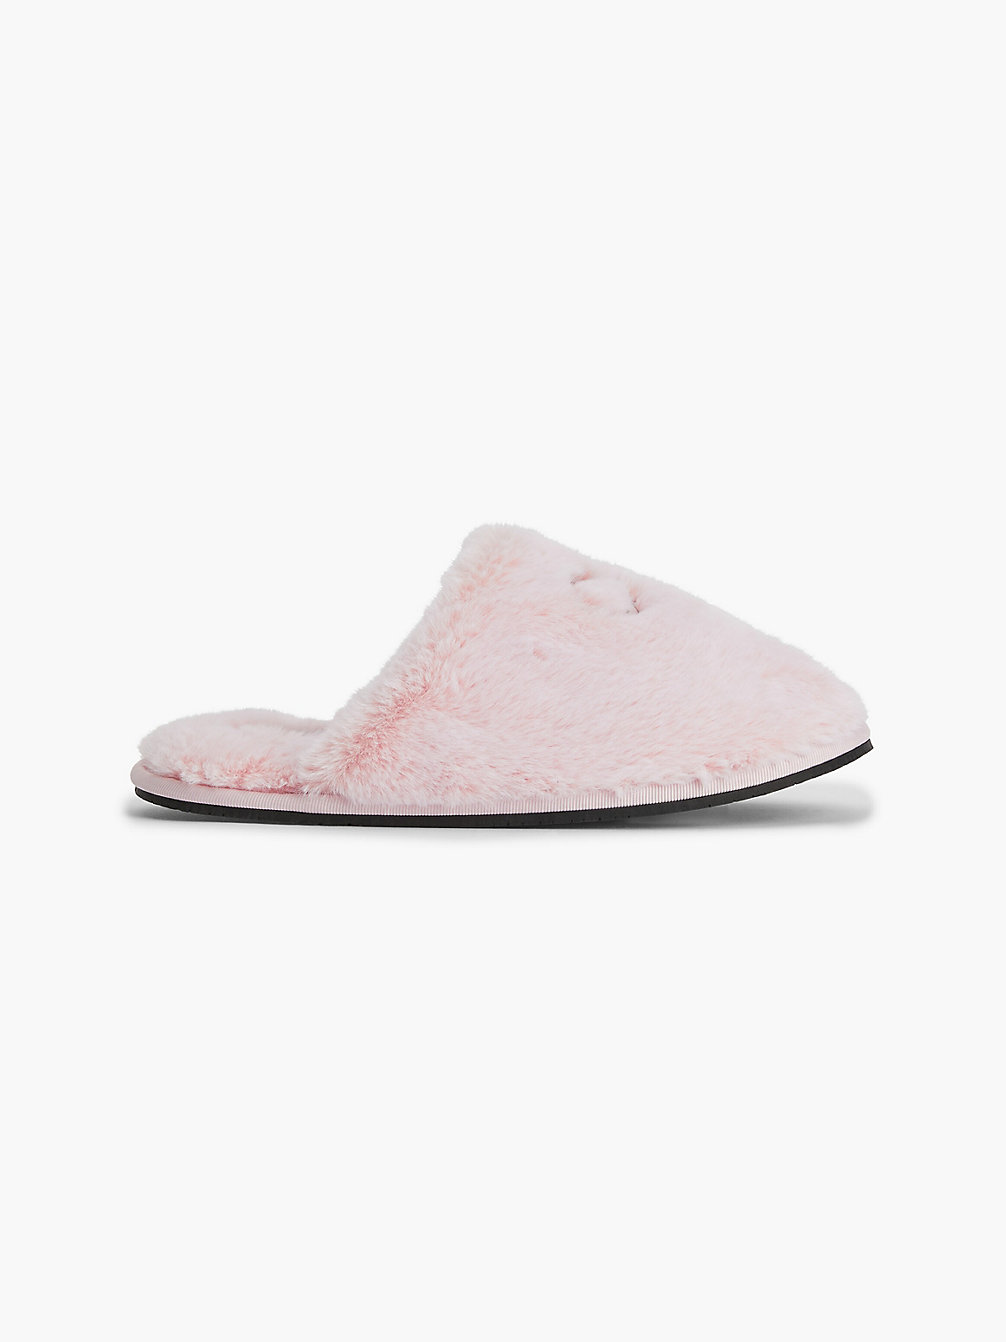 PINK BLOOM Recycled Faux Fur Slippers undefined women Calvin Klein